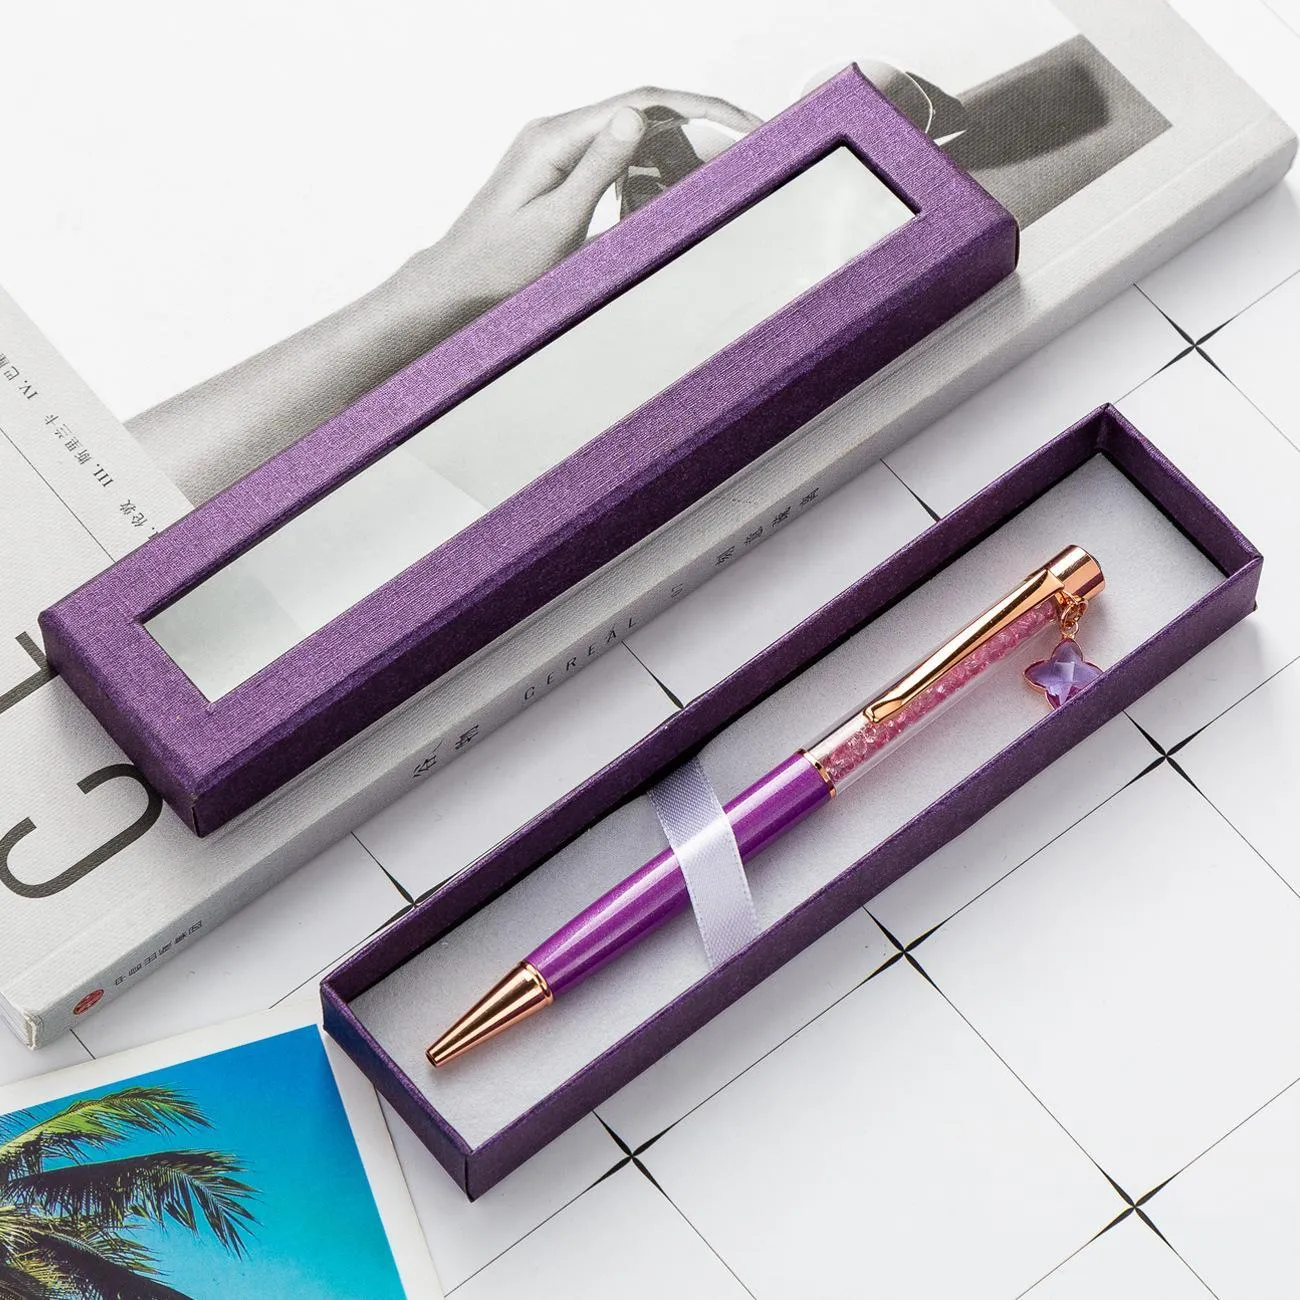 Pen Gift Box Transparent Window Paper Packaging Pen Box Ballpoint Pens Pencil Cases Display Stand Rack School Office Supplies Stationery DH8577